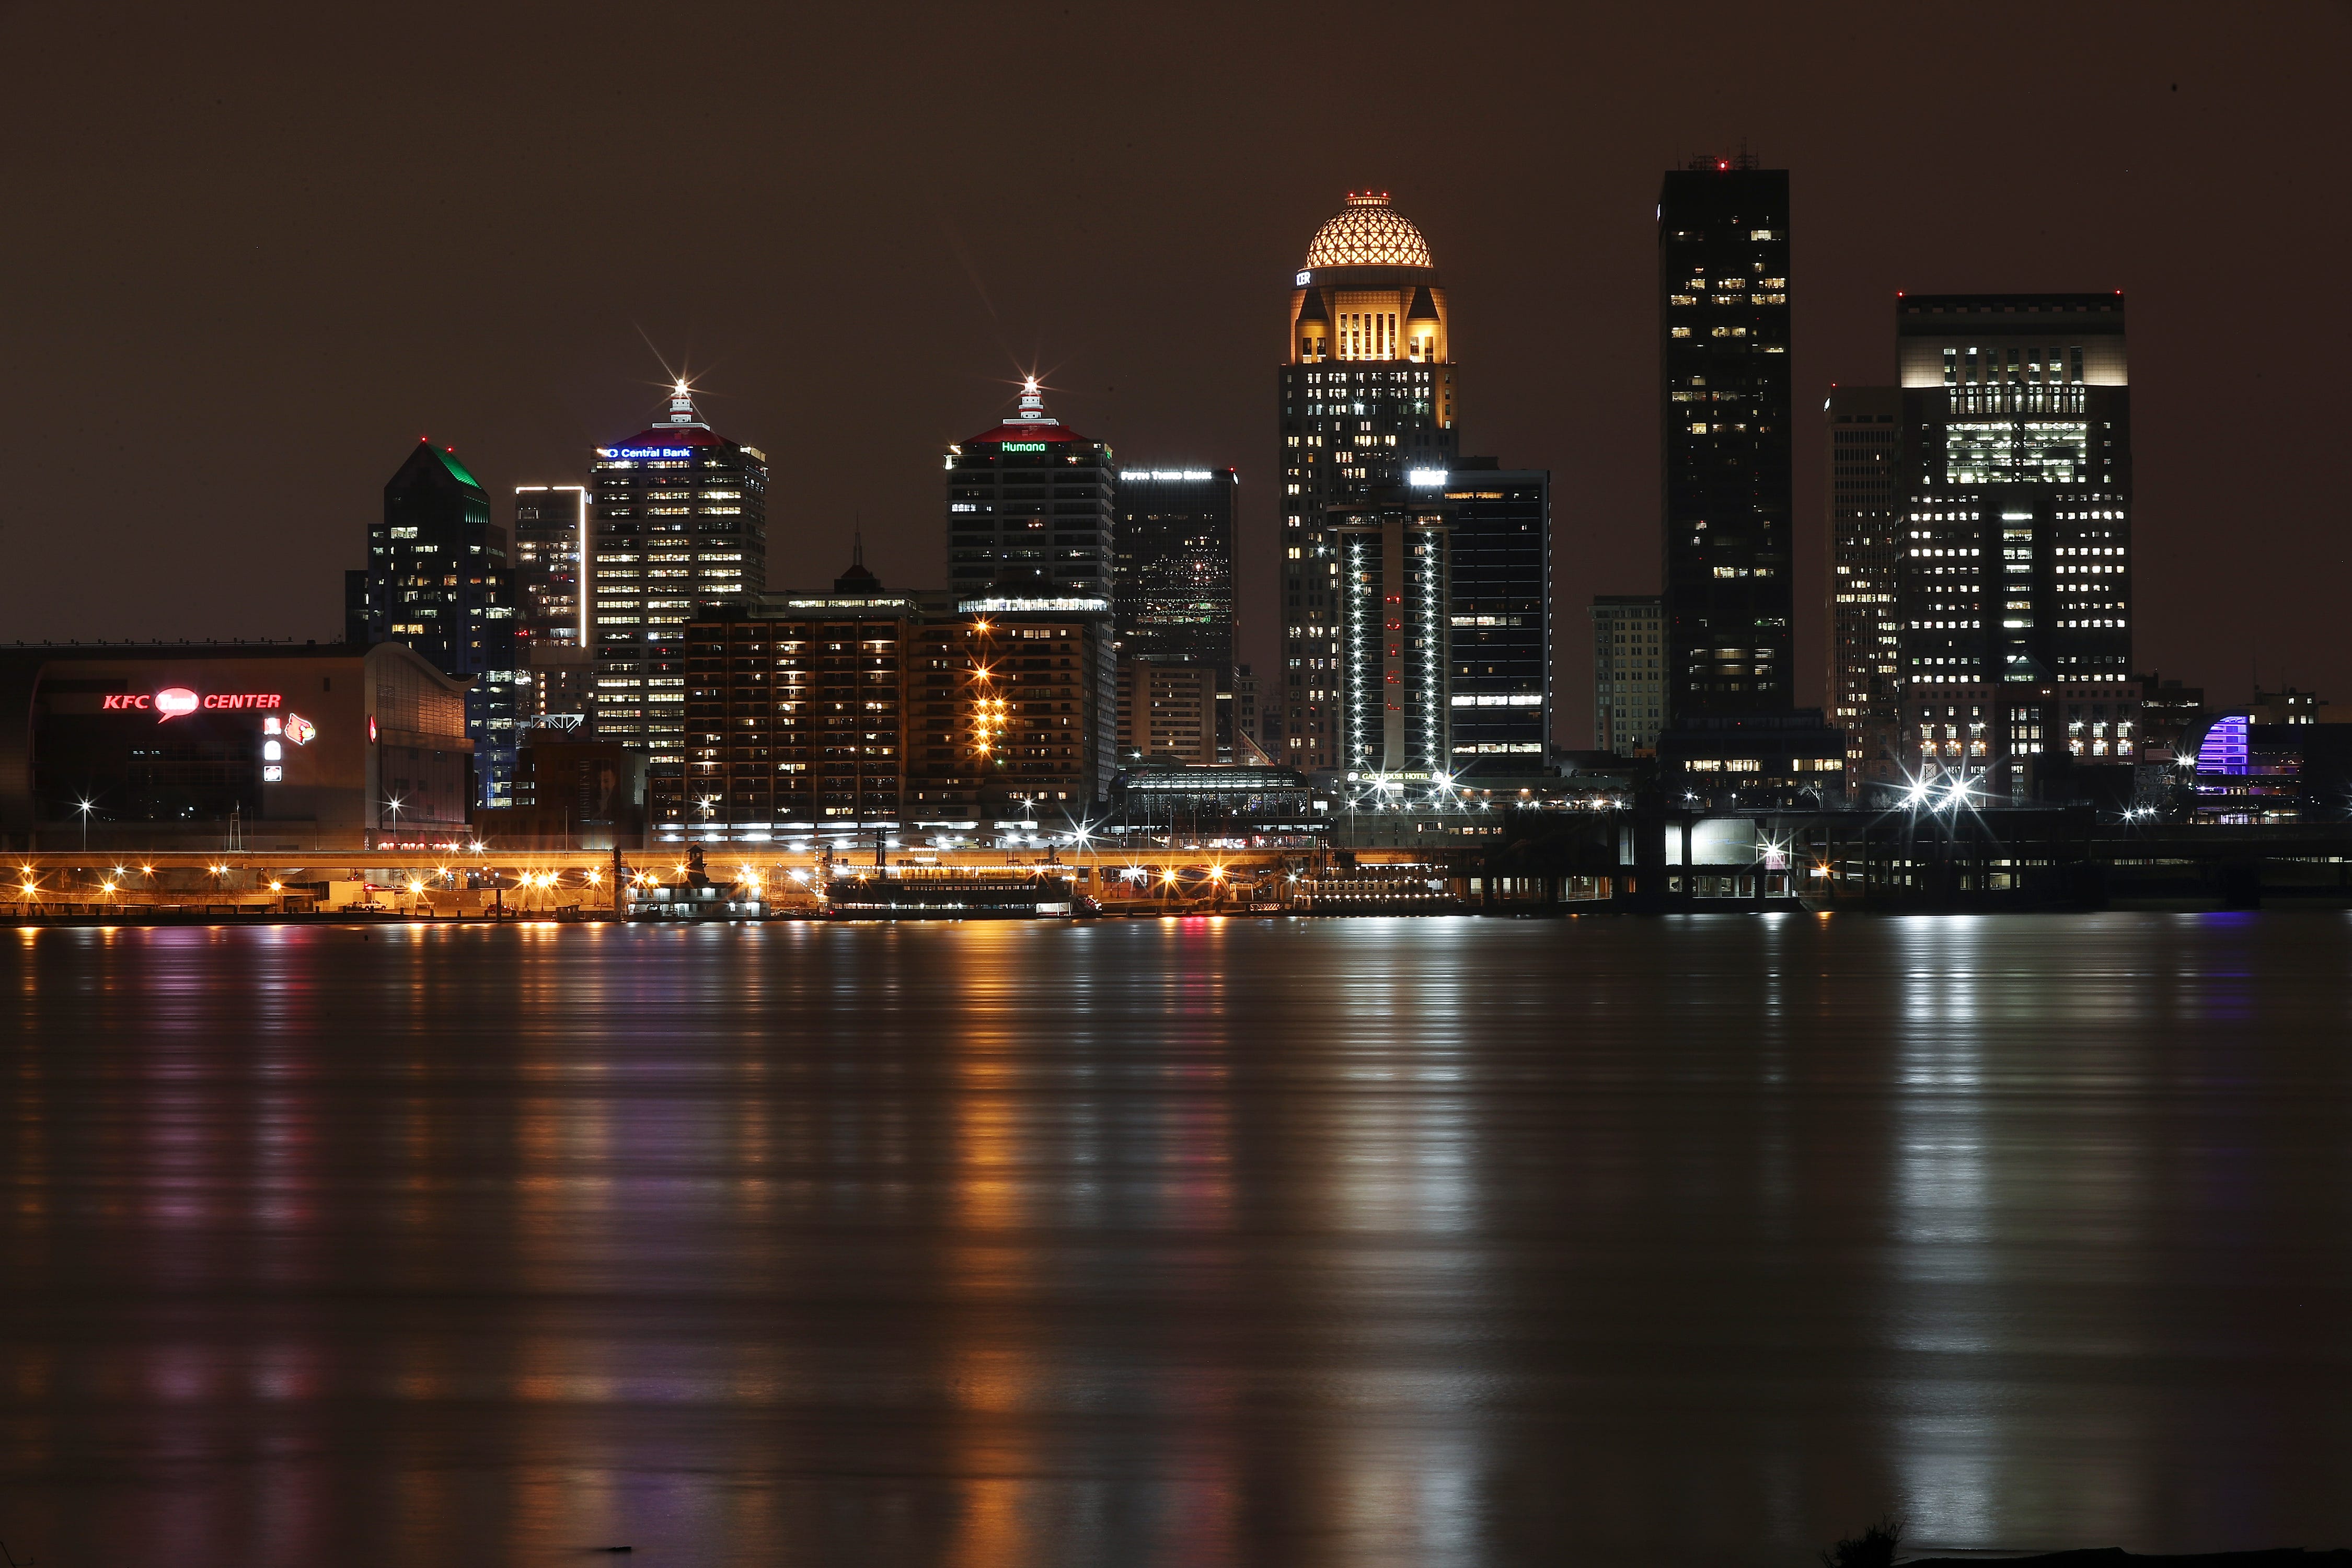 8:45 p.m.

The Louisville skyline pierces the night in a view from Clarksville, Ind., on Jan. 28, 2020.